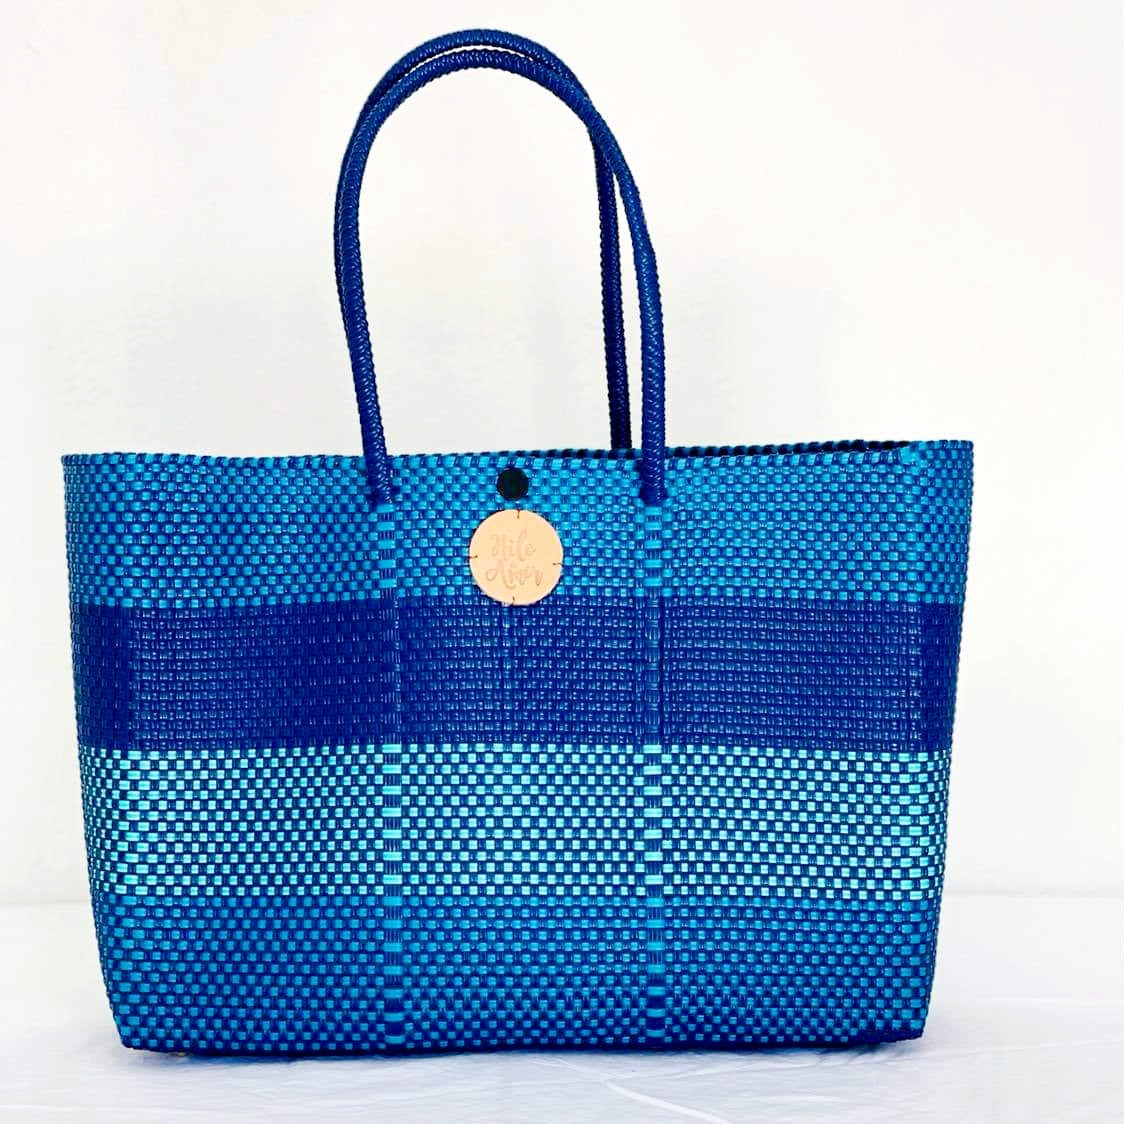 Mexican Tote Bag. Recycled Plastic Bag. Mexican Artisanal Bag. 